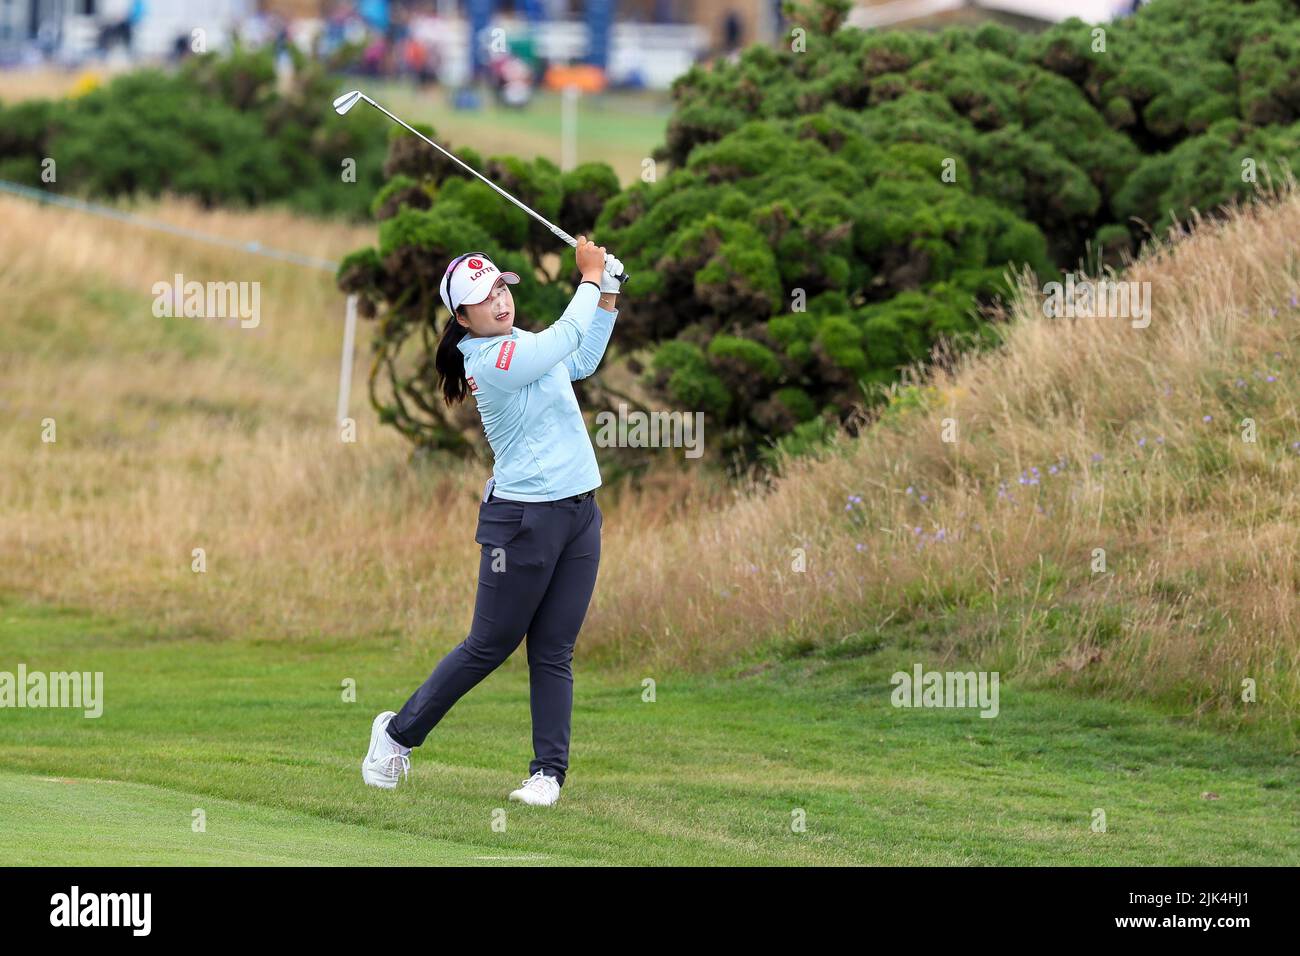 Irvine, UK. 30th July, 2022. The third round of the Trust Golf Women's Scottish Golf took place with 75 players making the cut. Heavy overnight rain from Friday into Saturday made for a softer and more testing course. Hyo-jin choi playing from the 7th fairway. Credit: Findlay/Alamy Live News Stock Photo